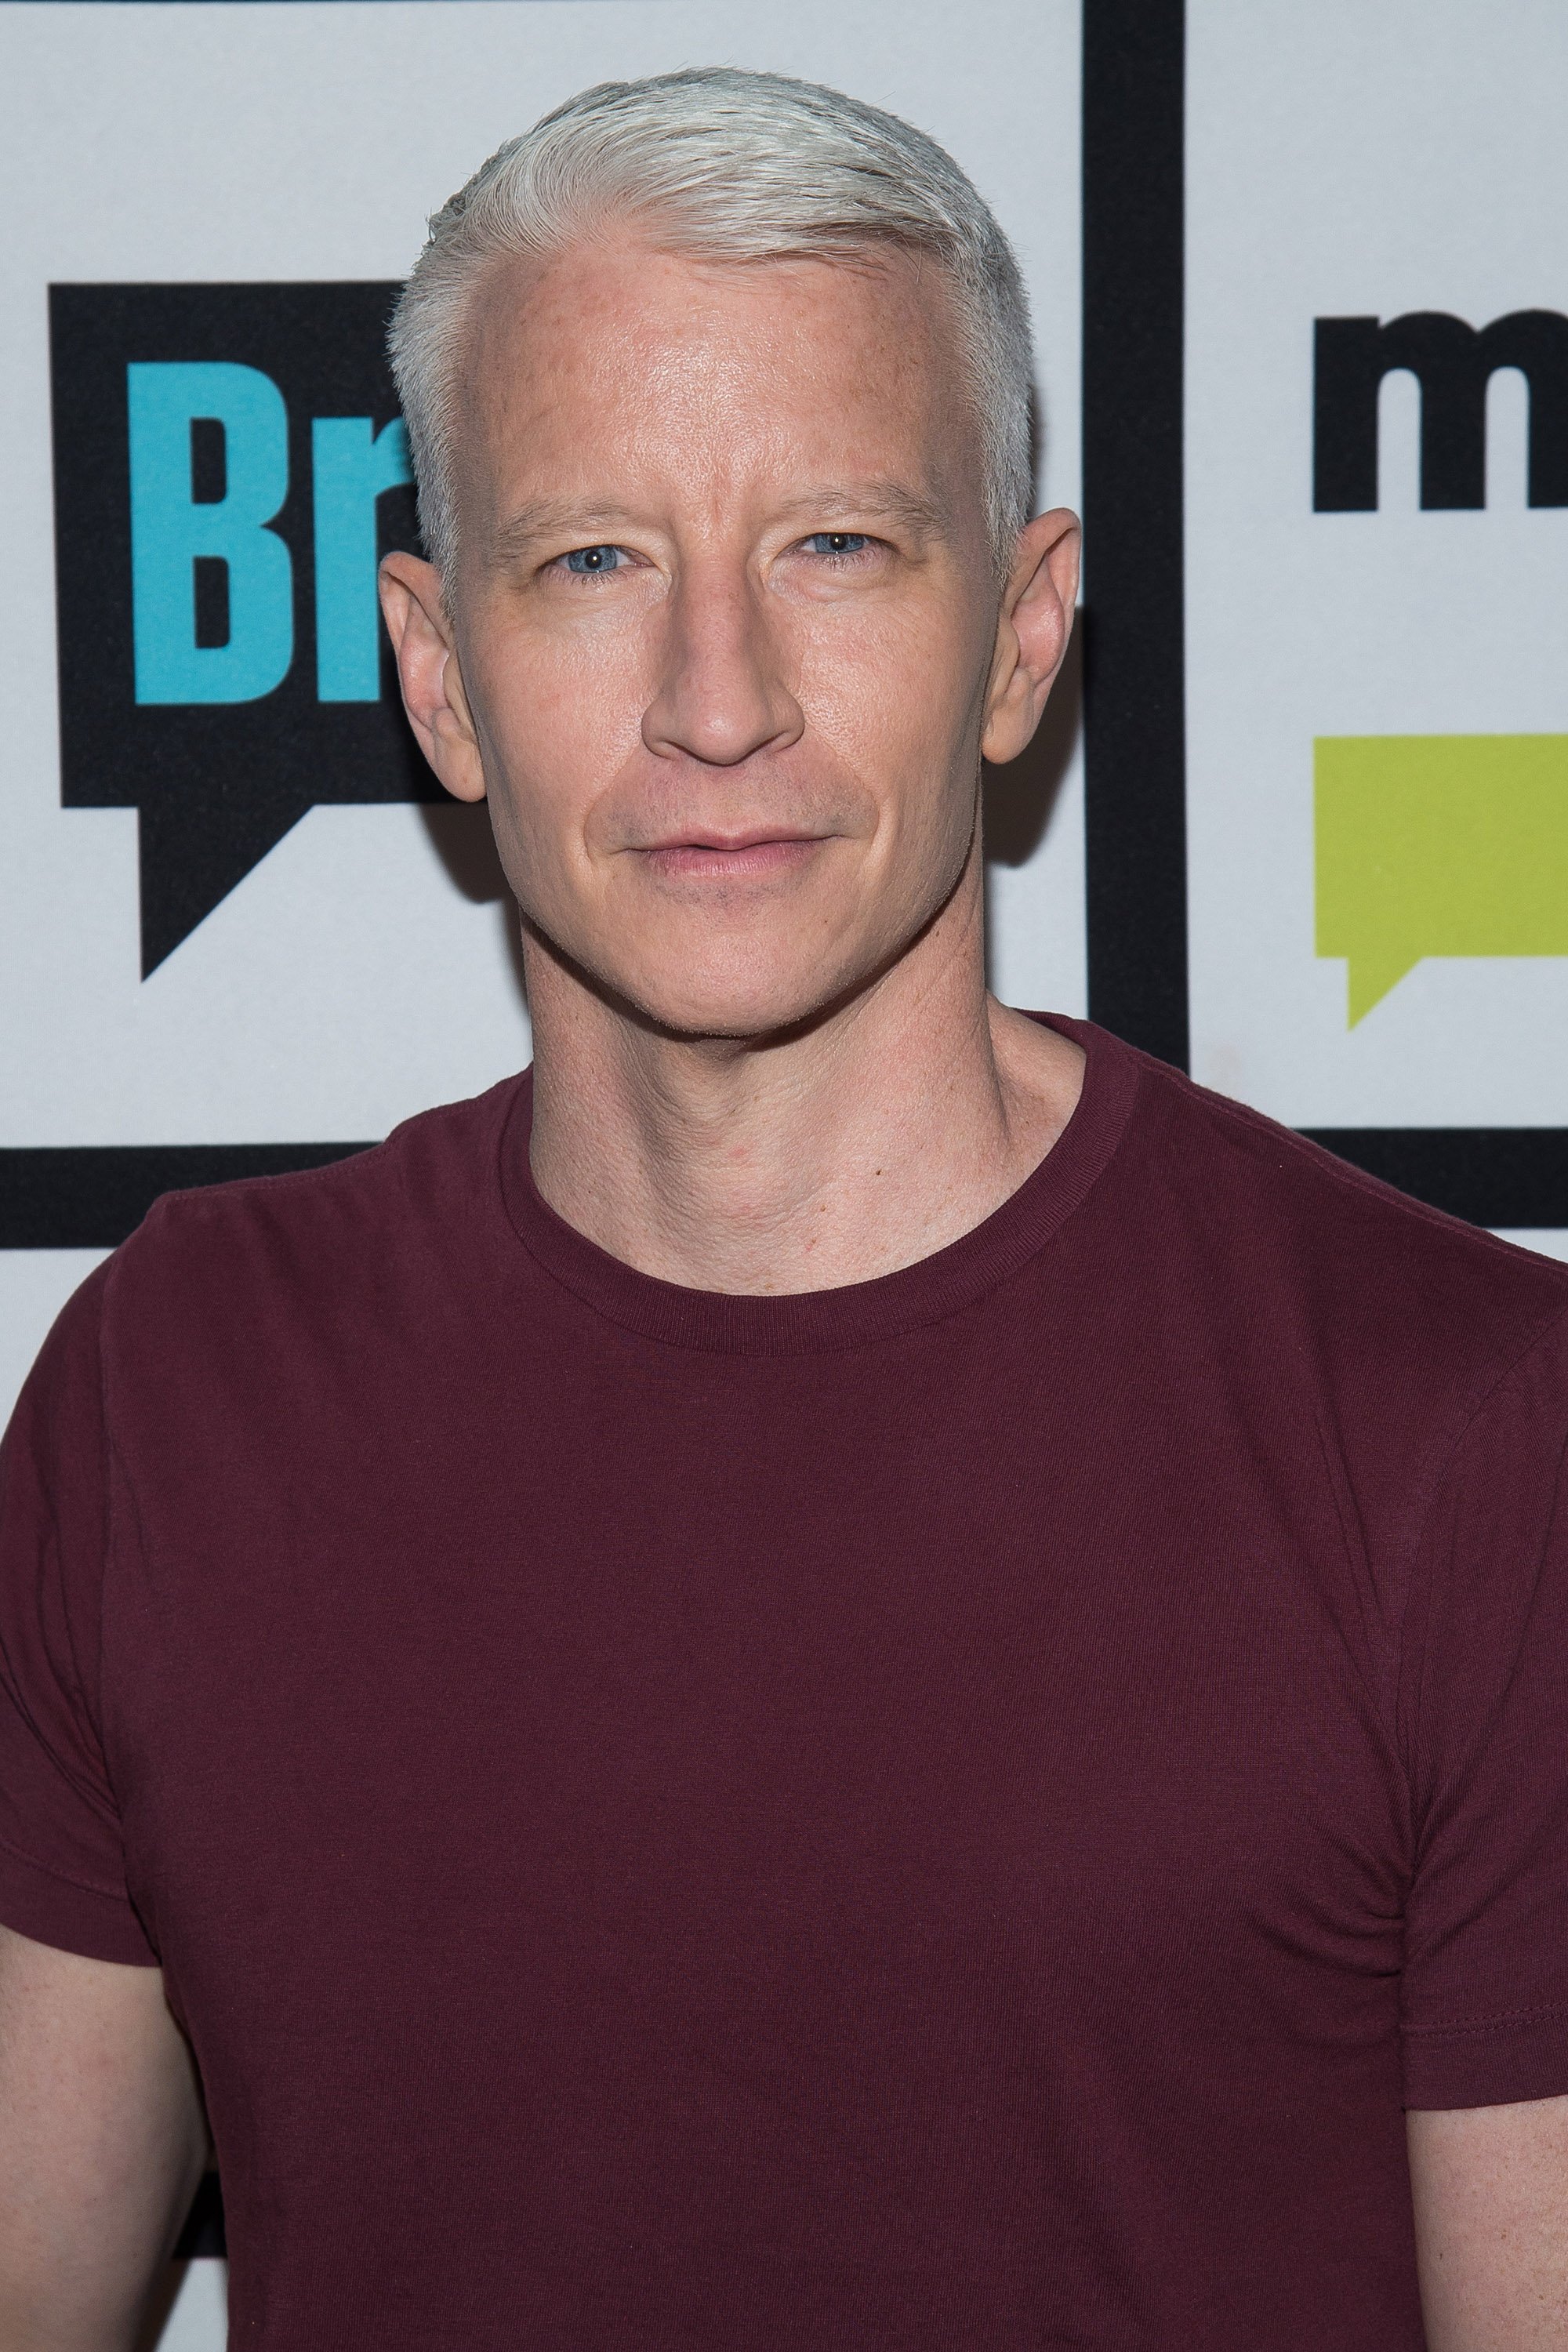 Anderson Cooper on an episode of "Watch What Happens Live" on November 30, 2016. | Source: Getty Images